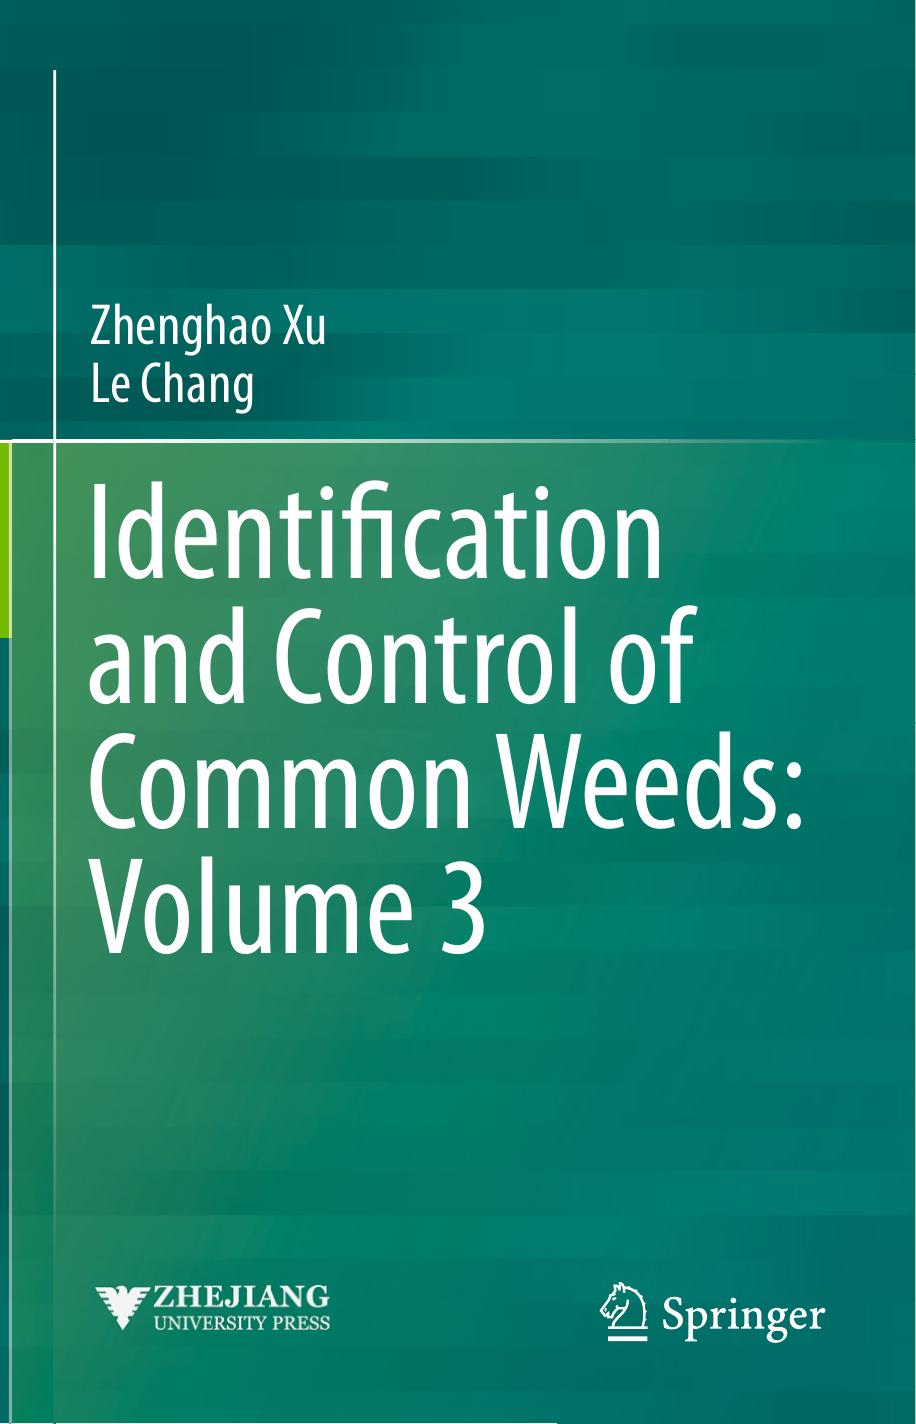 Identification and Control of Common Weeds, 2017